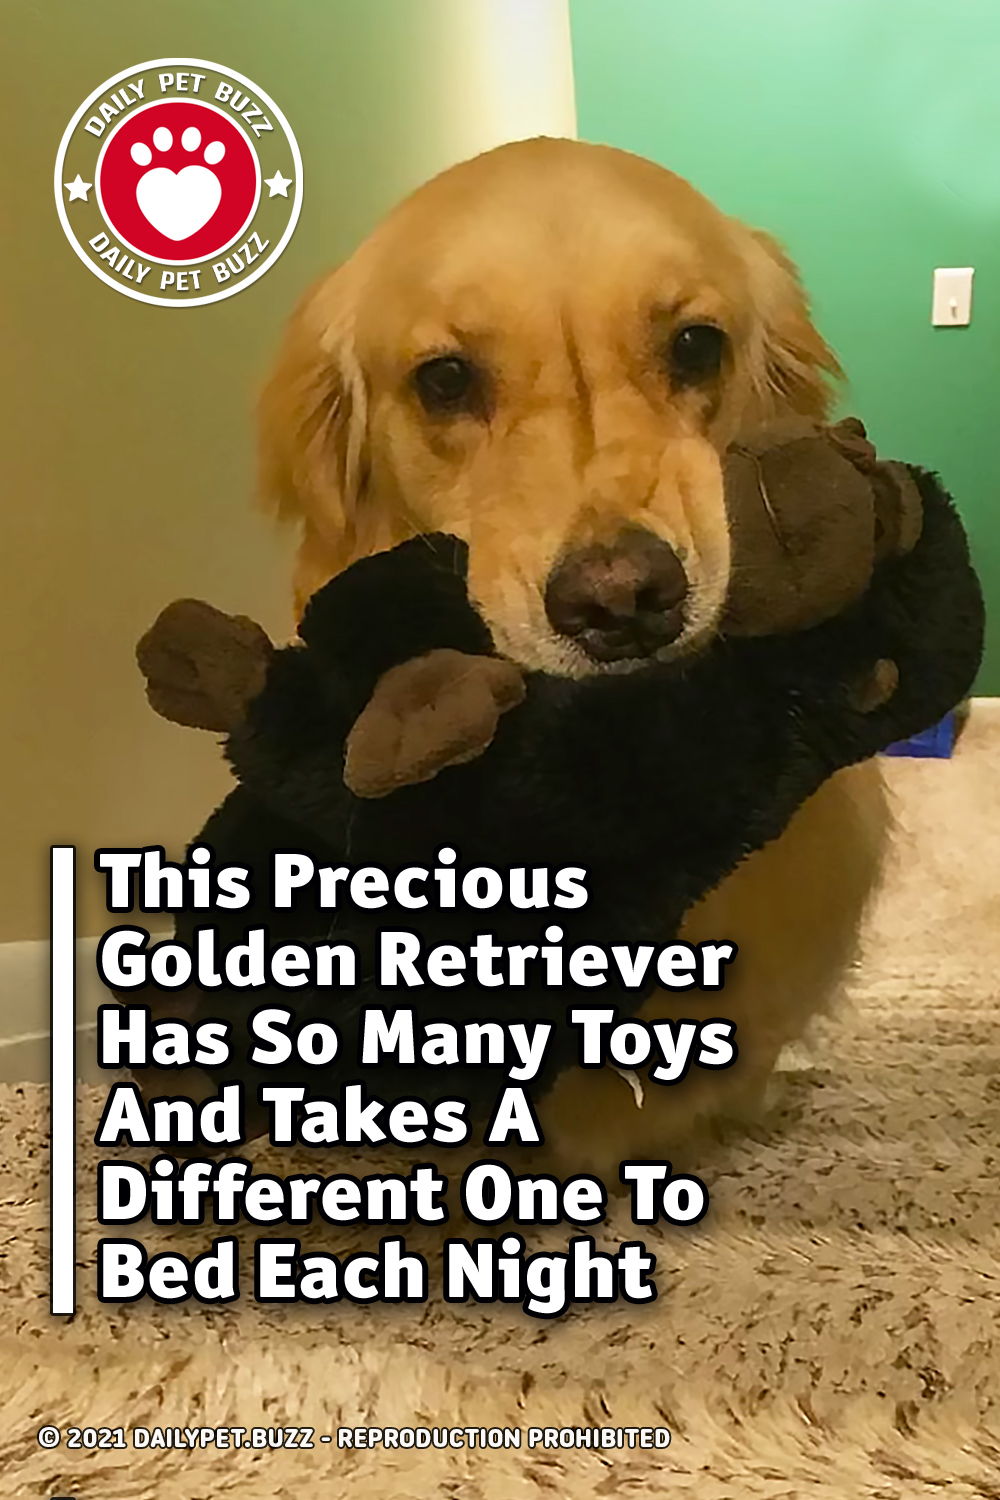 This Precious Golden Retriever Has So Many Toys And Takes A Different One To Bed Each Night